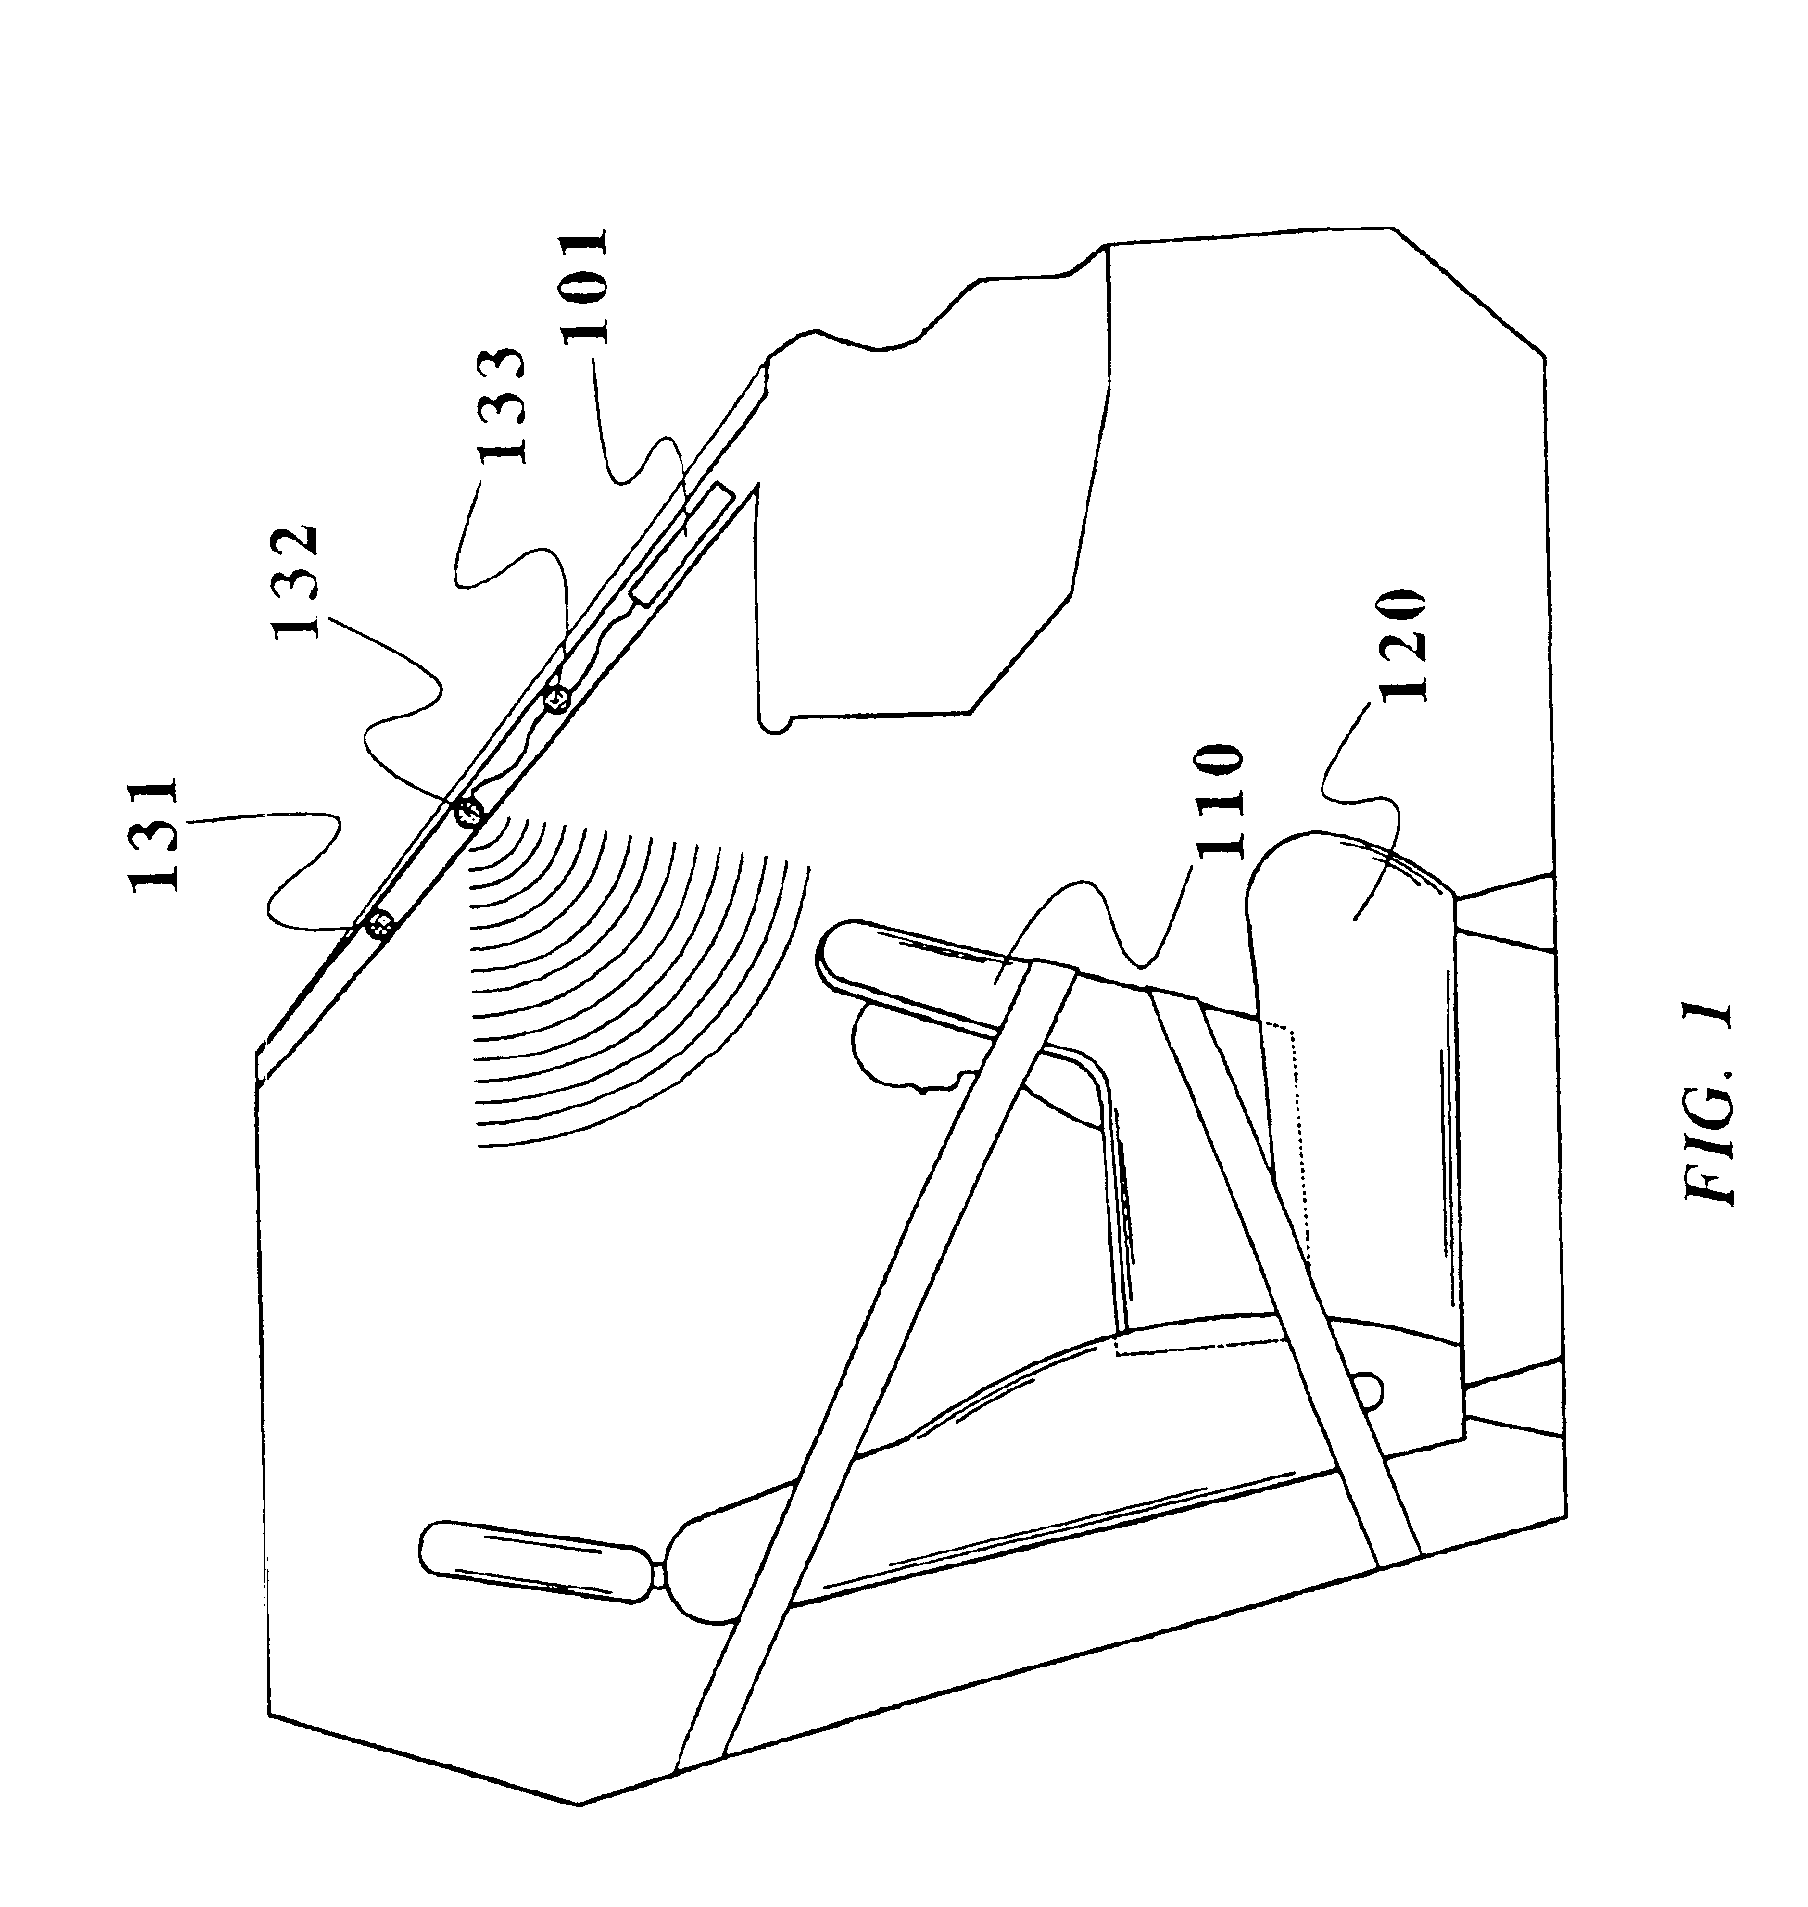 Method and arrangement for obtaining and conveying information about occupancy of a vehicle